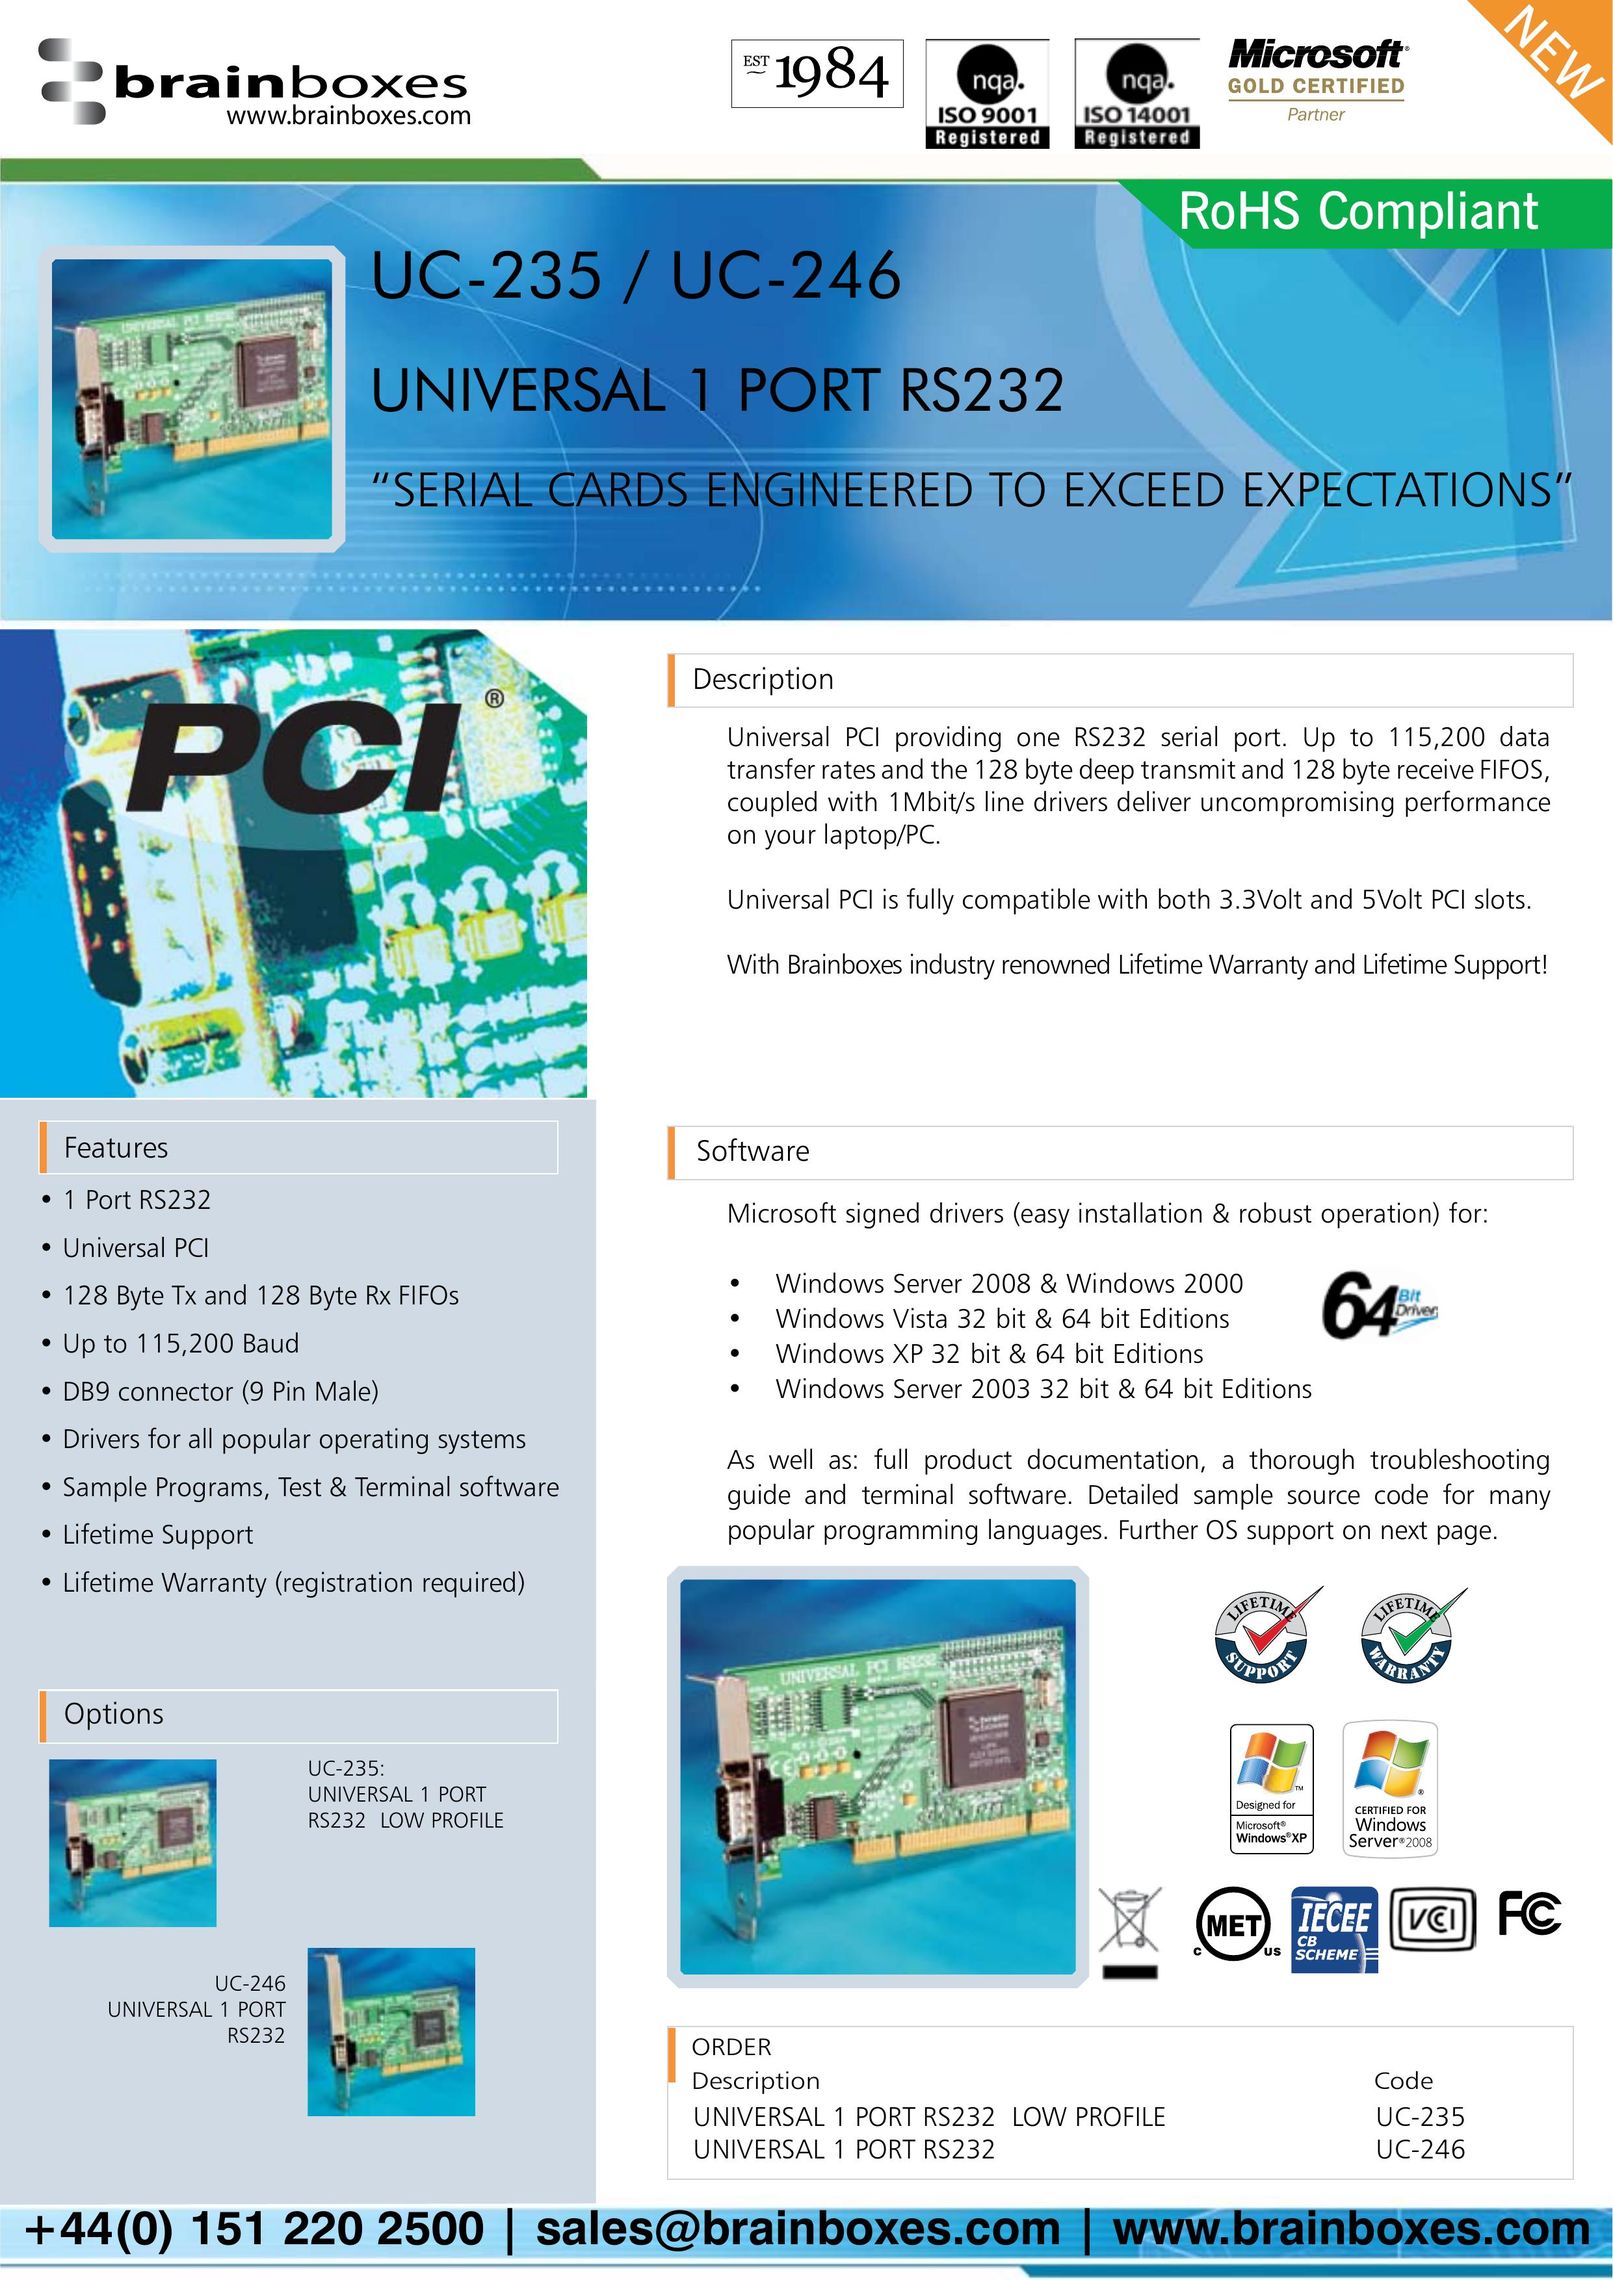 Brainboxes UC-246 Network Card User Manual